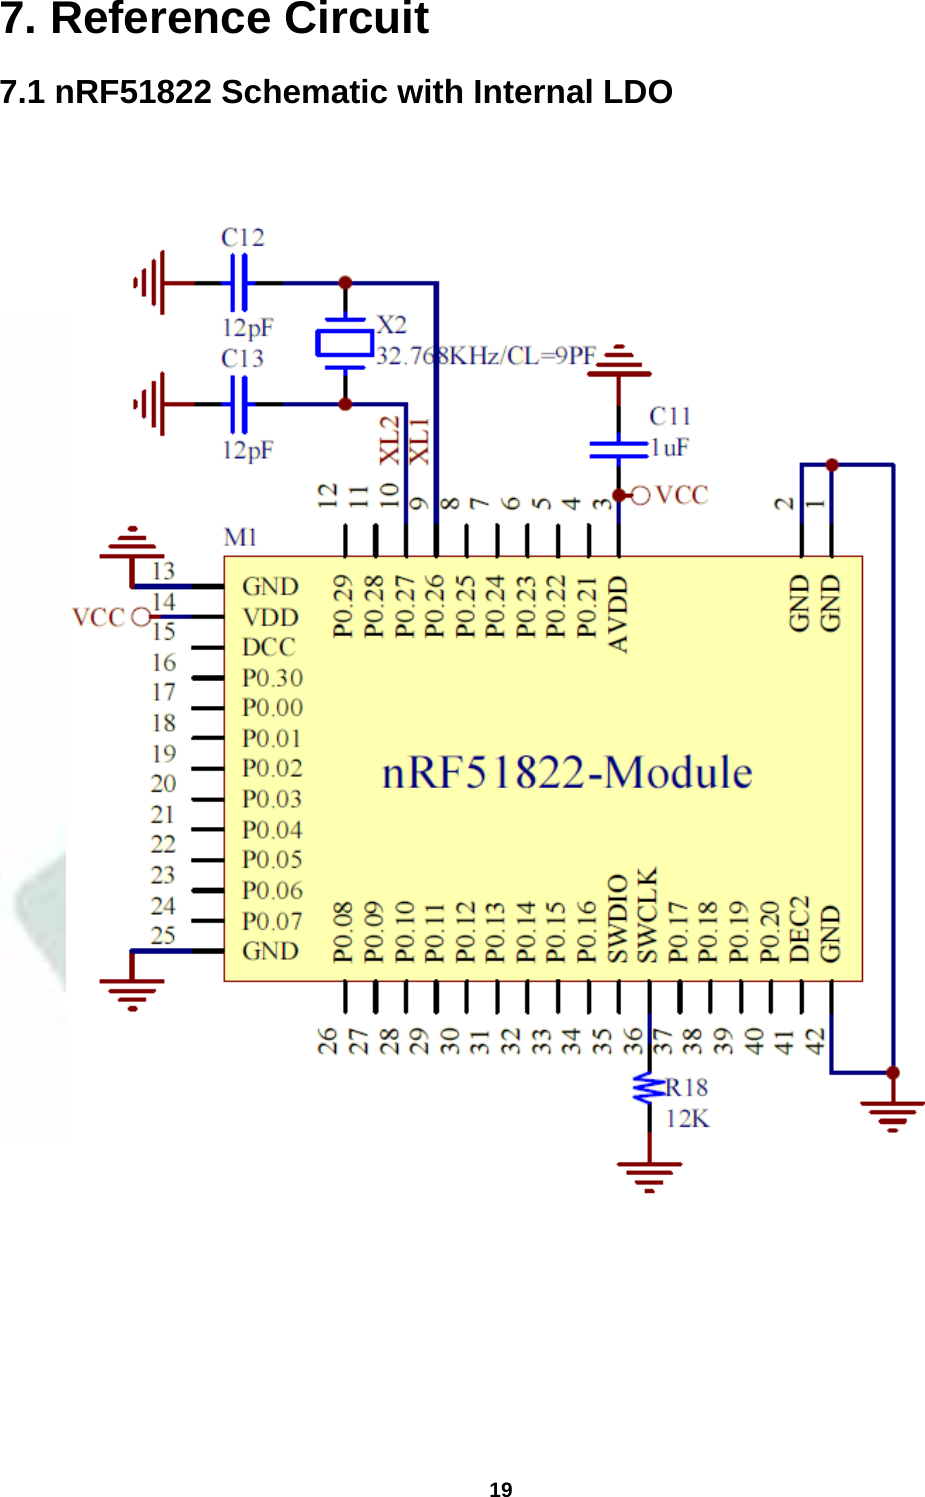  19  7. Reference Circuit 7.1 nRF51822 Schematic with Internal LDO